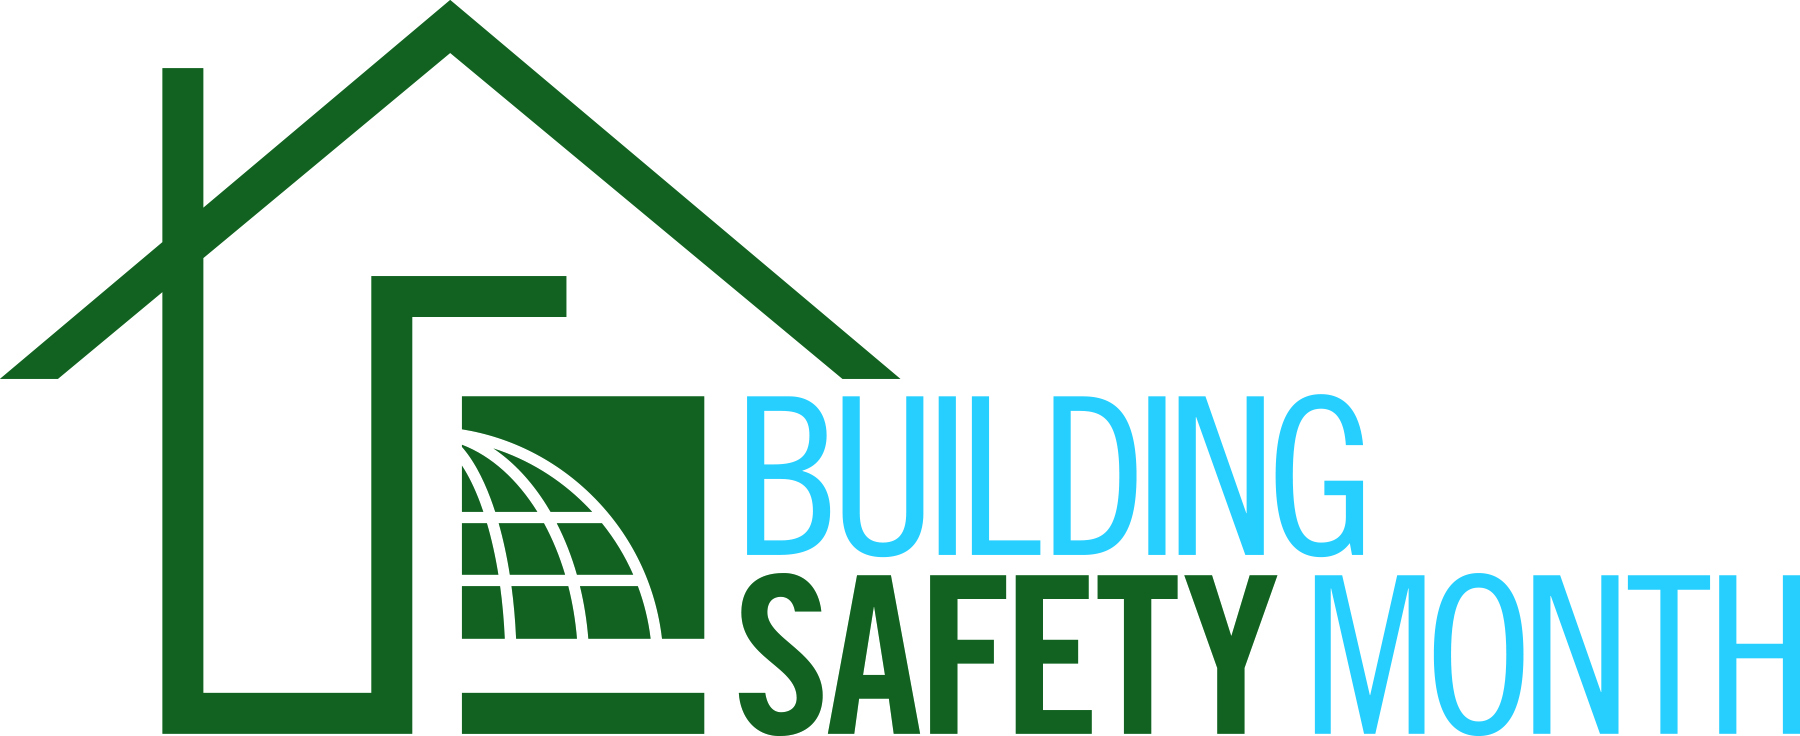 Building Safety Month Logo